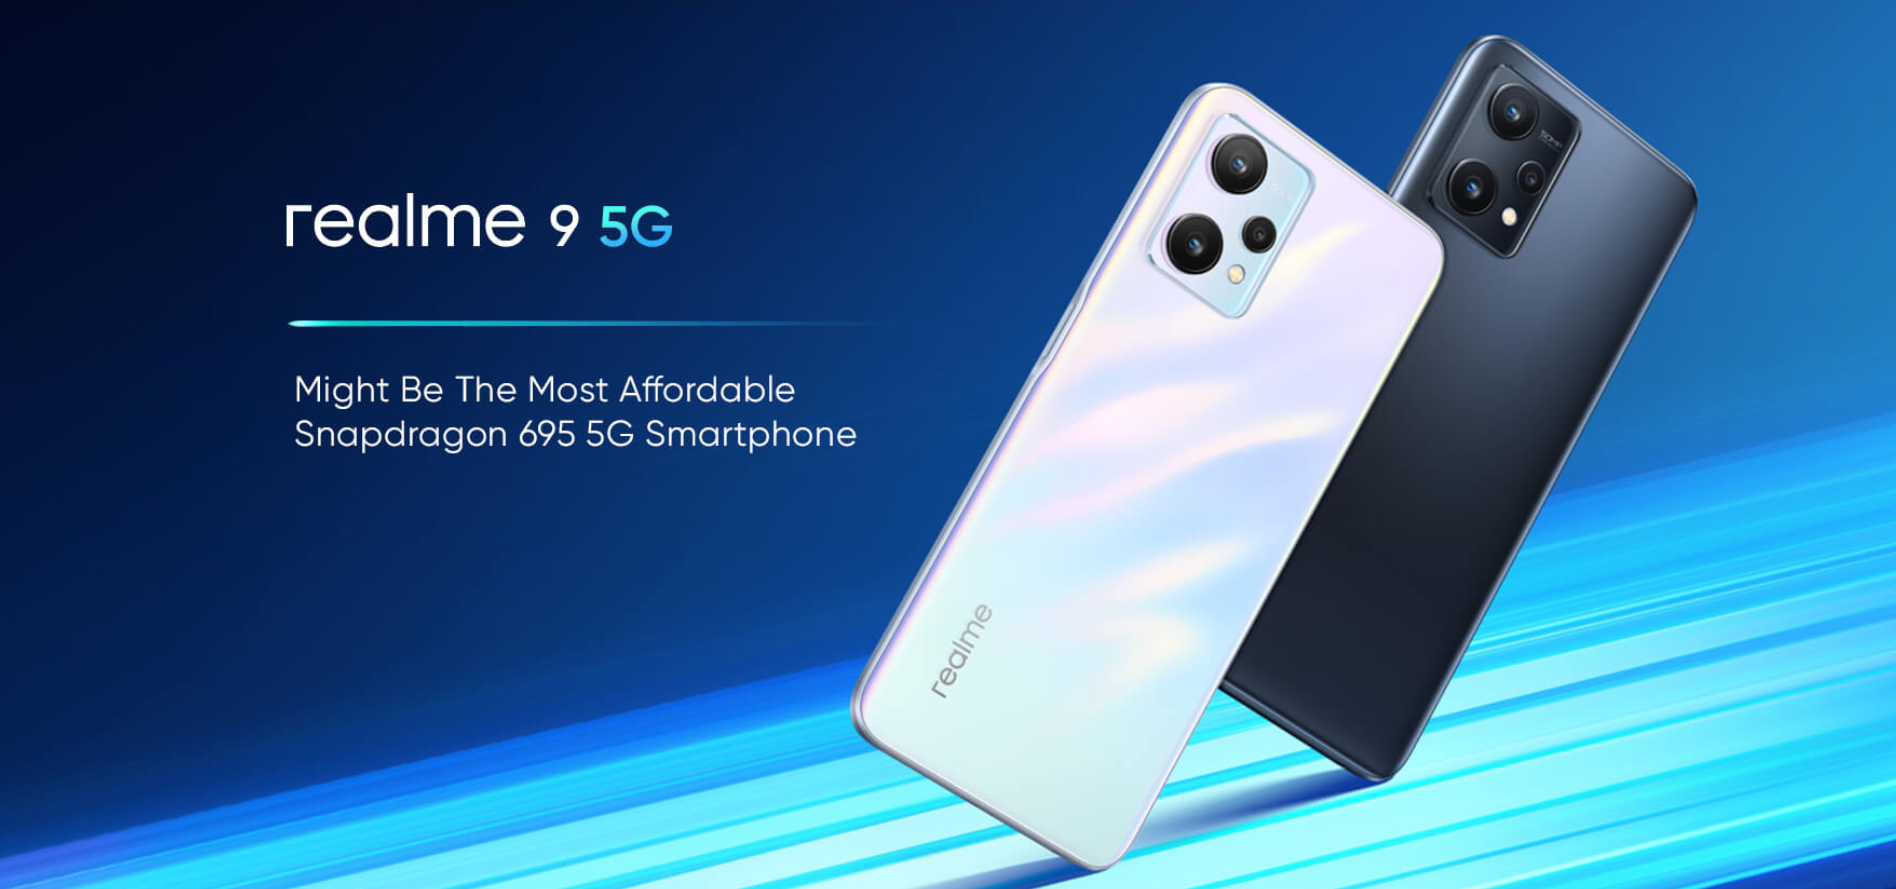 Realme 9 5G For Europe Is Not The Same Realme 9 In Asia